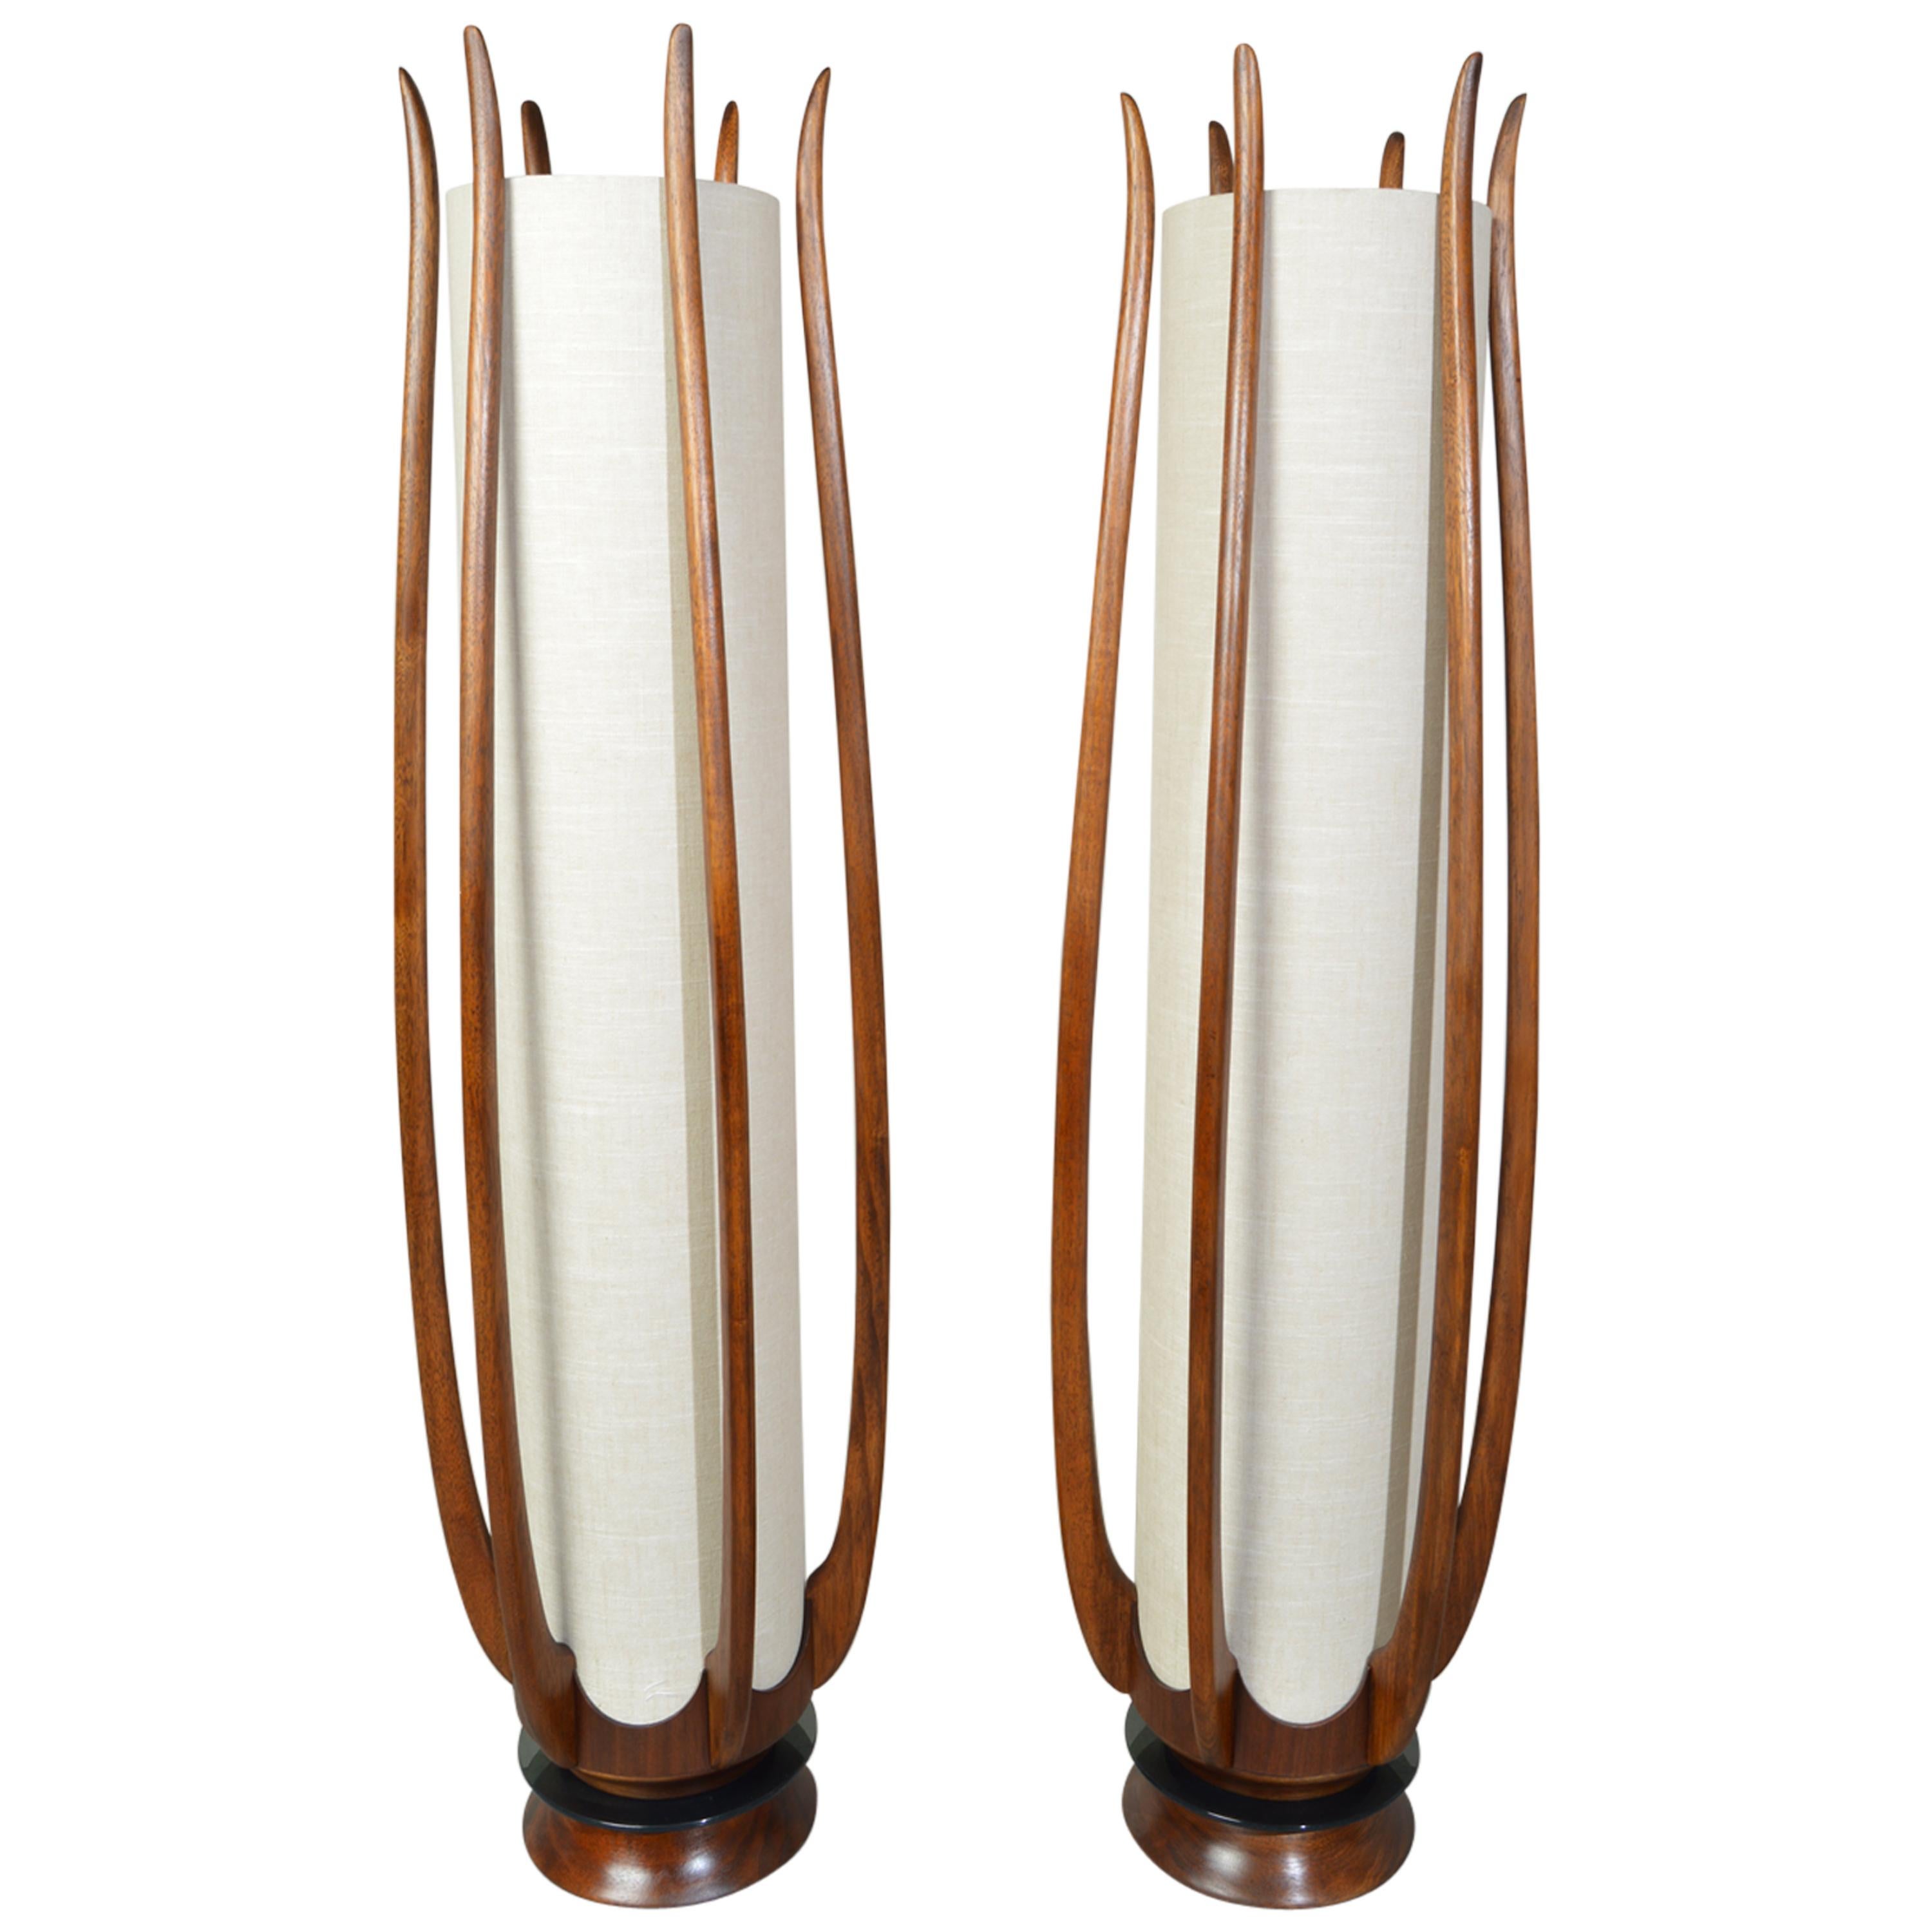 Pair of Modeline Lamp Co Sculptural Walnut Floor Lamps After Adrian Pearsall